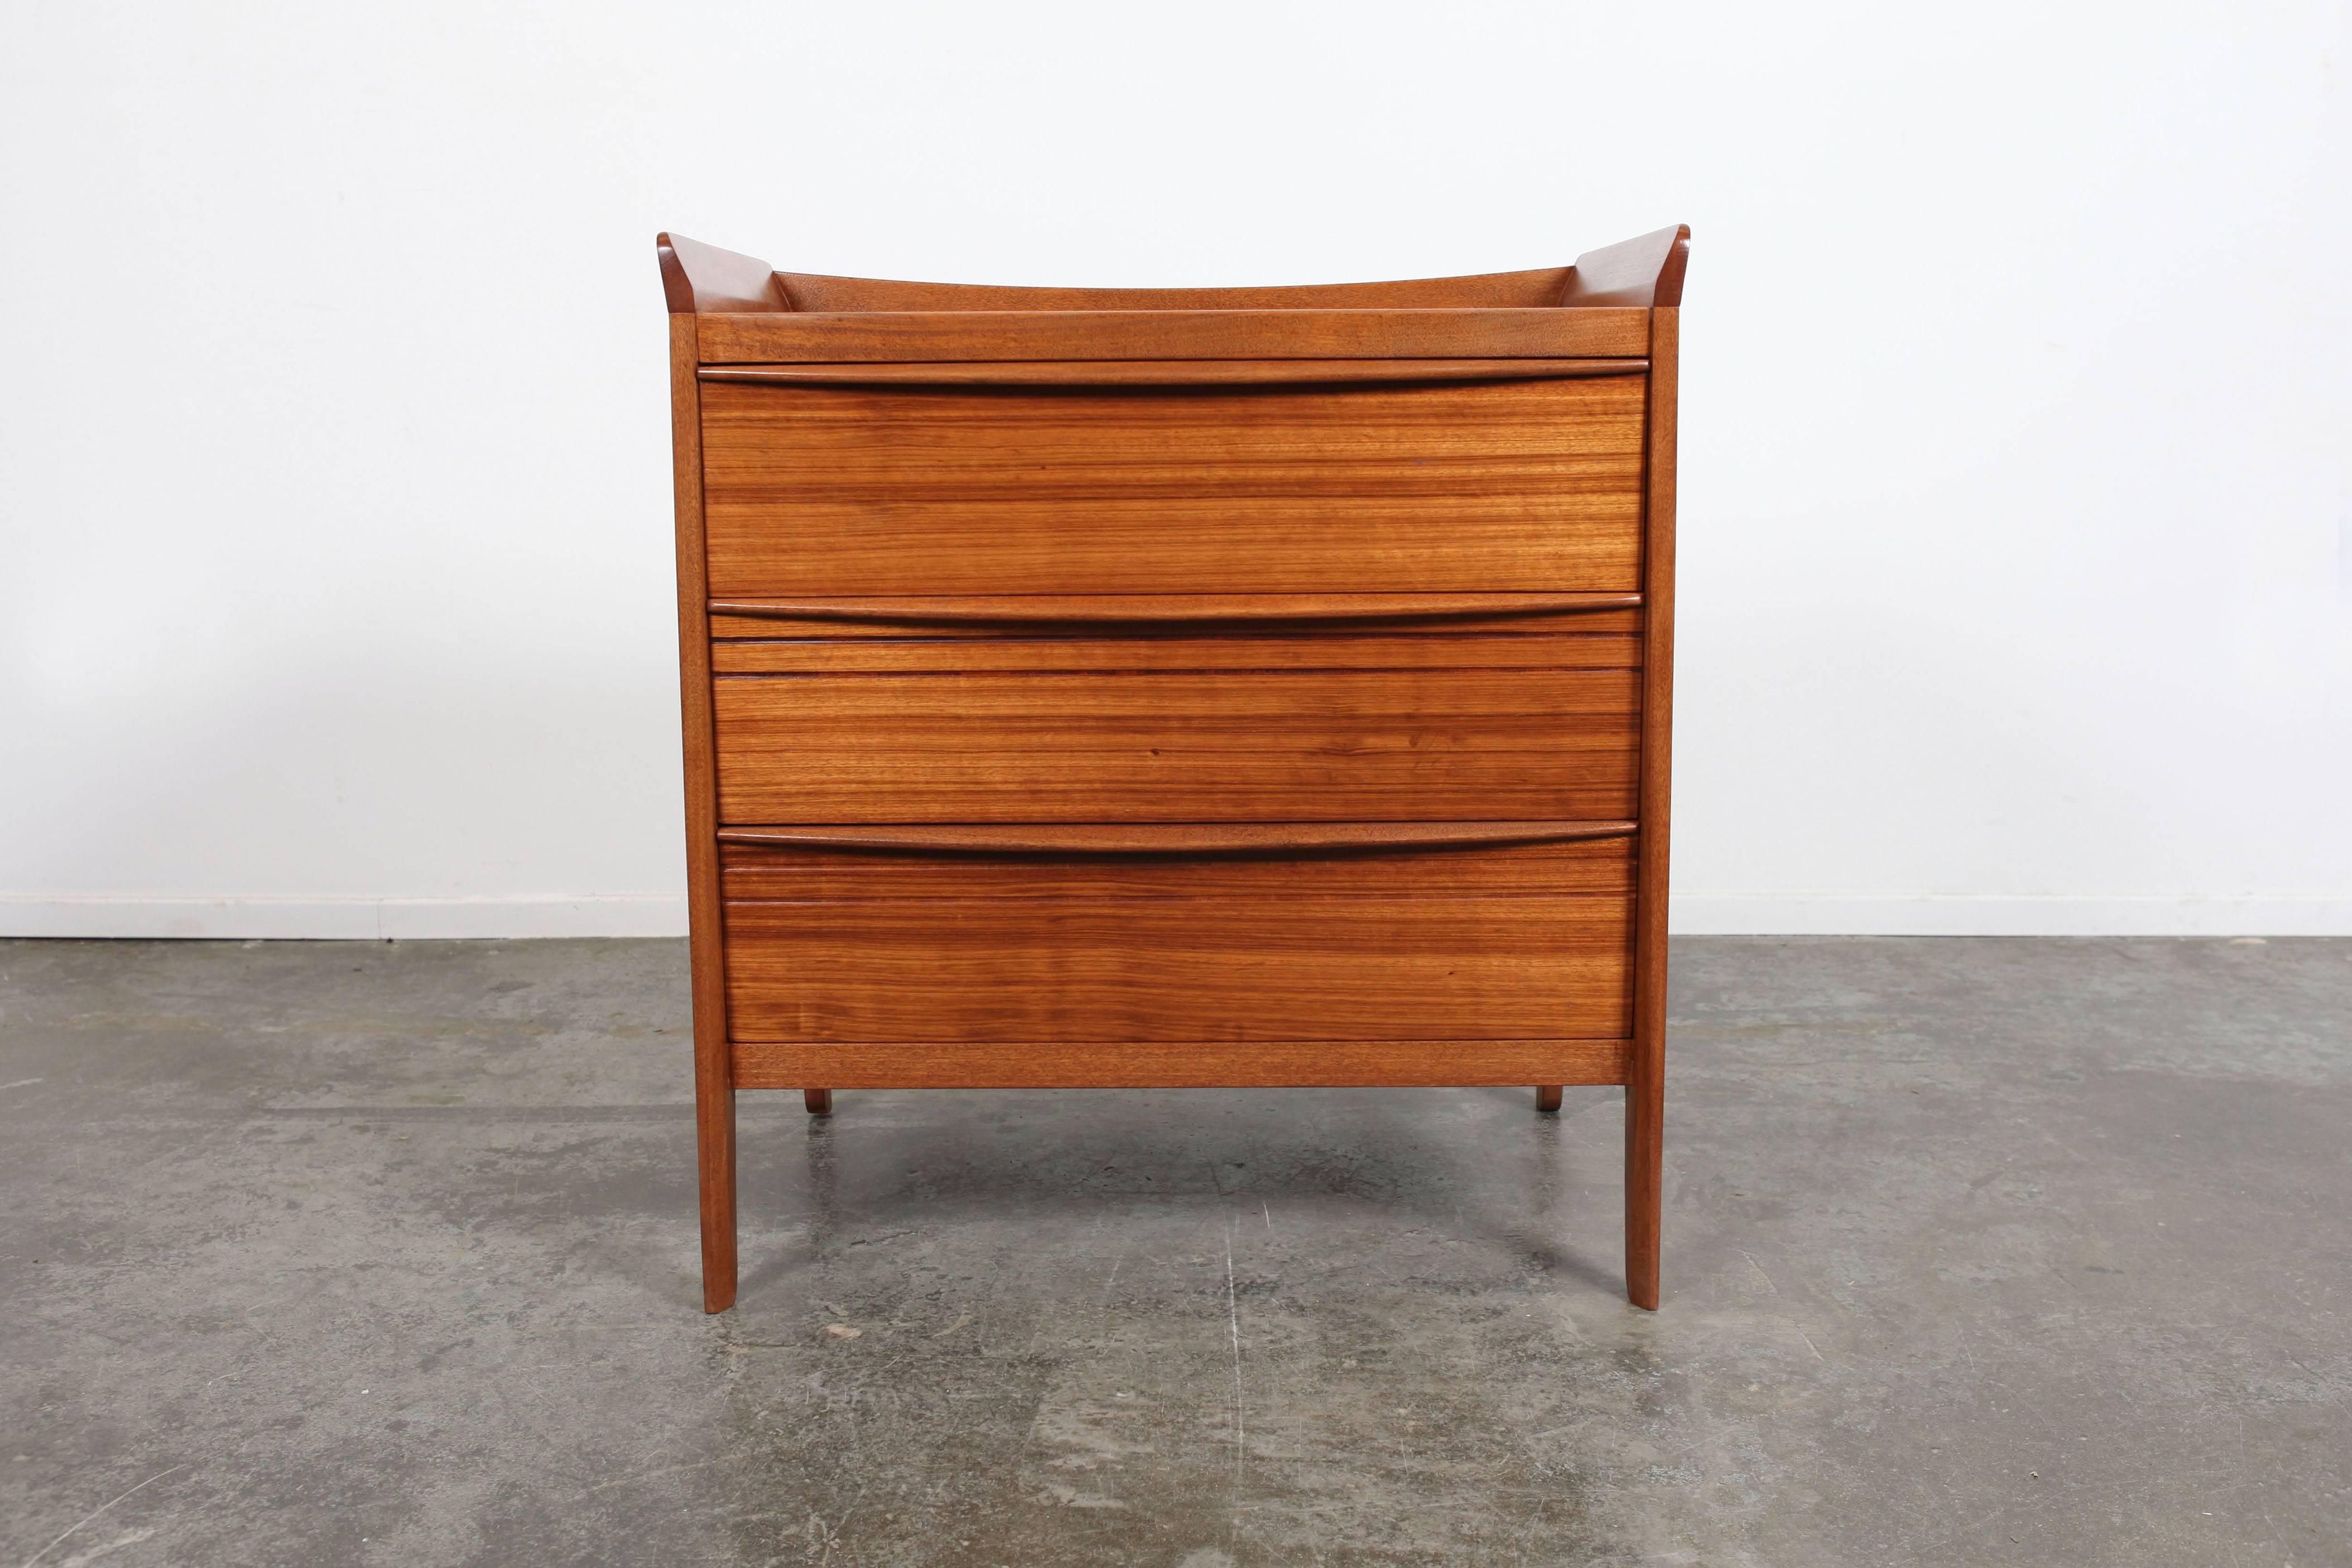 Mid-Century Modern dresser from England with silken mahogany veneer. This piece features a flared, raised border and contrasting side-paneling.